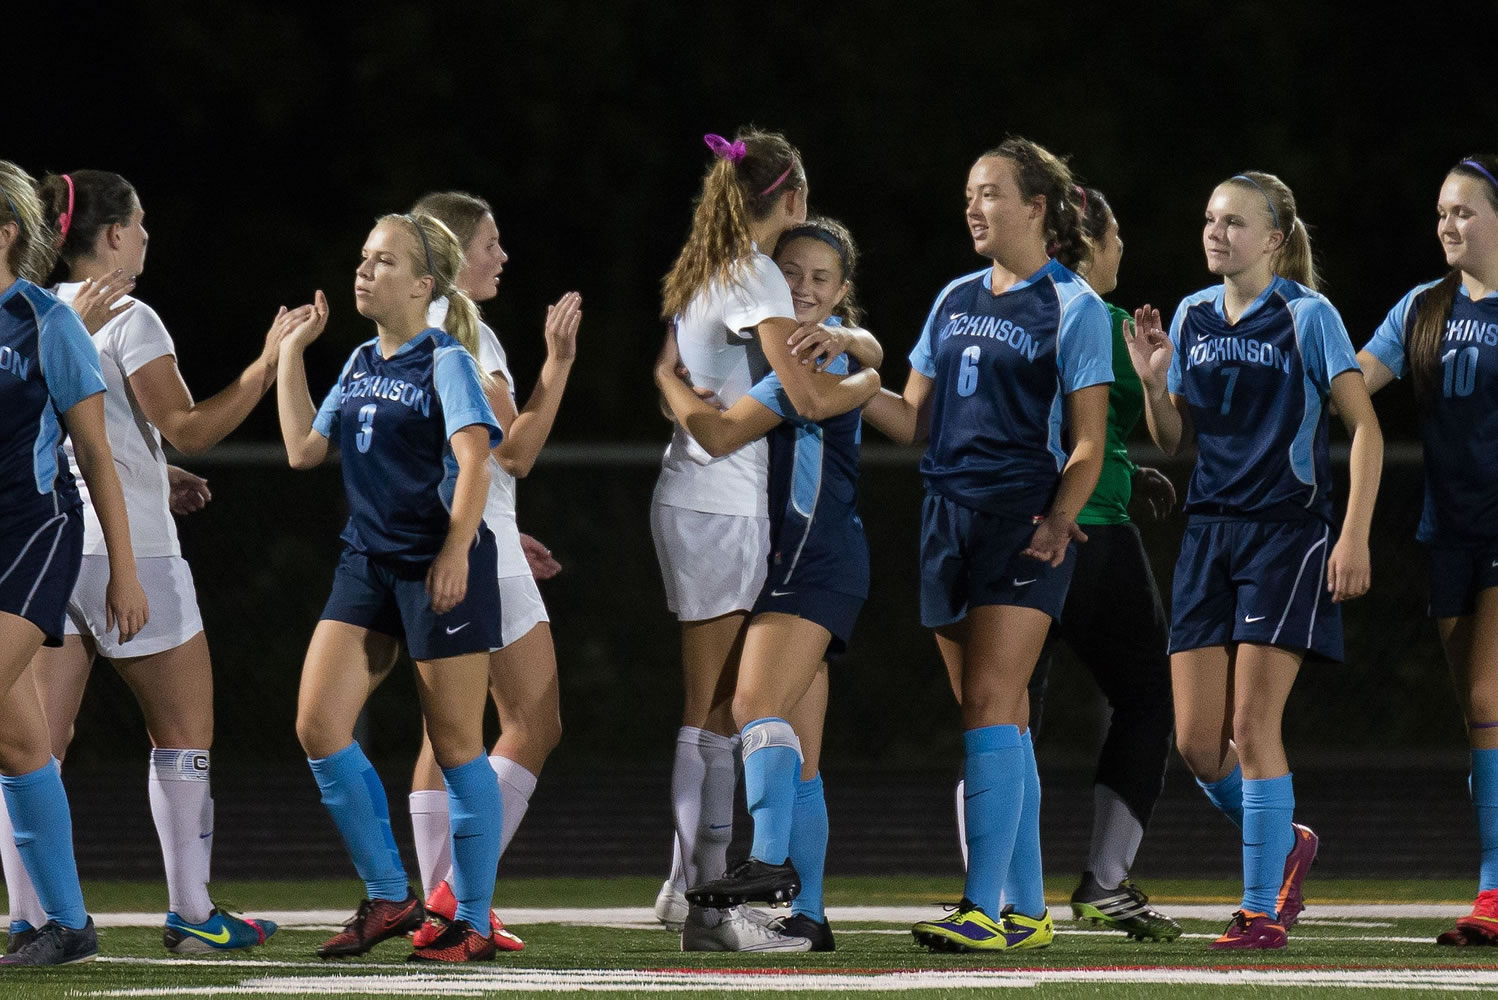 Ridgefield's Taryn Ries (center, in white) gives a post-game hug to Hockinson's Rylee Seekins after the Spudders' overtime win against the Hawks last week.